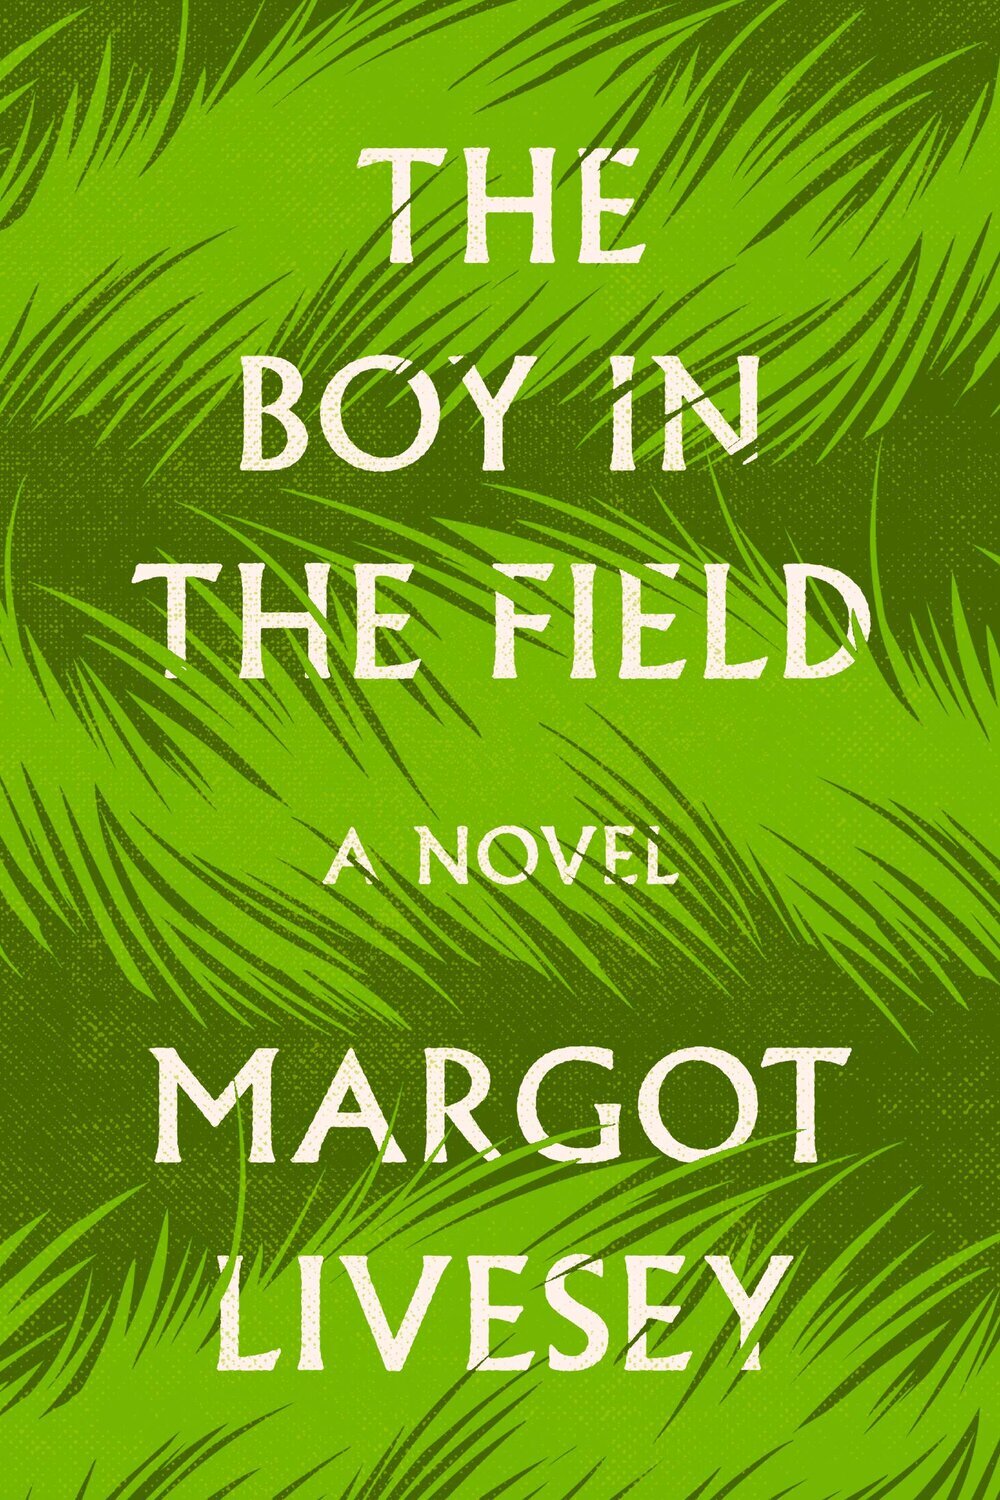 Best of Fiction 2020 The Boy in the Field by Margot Livesey.jpg